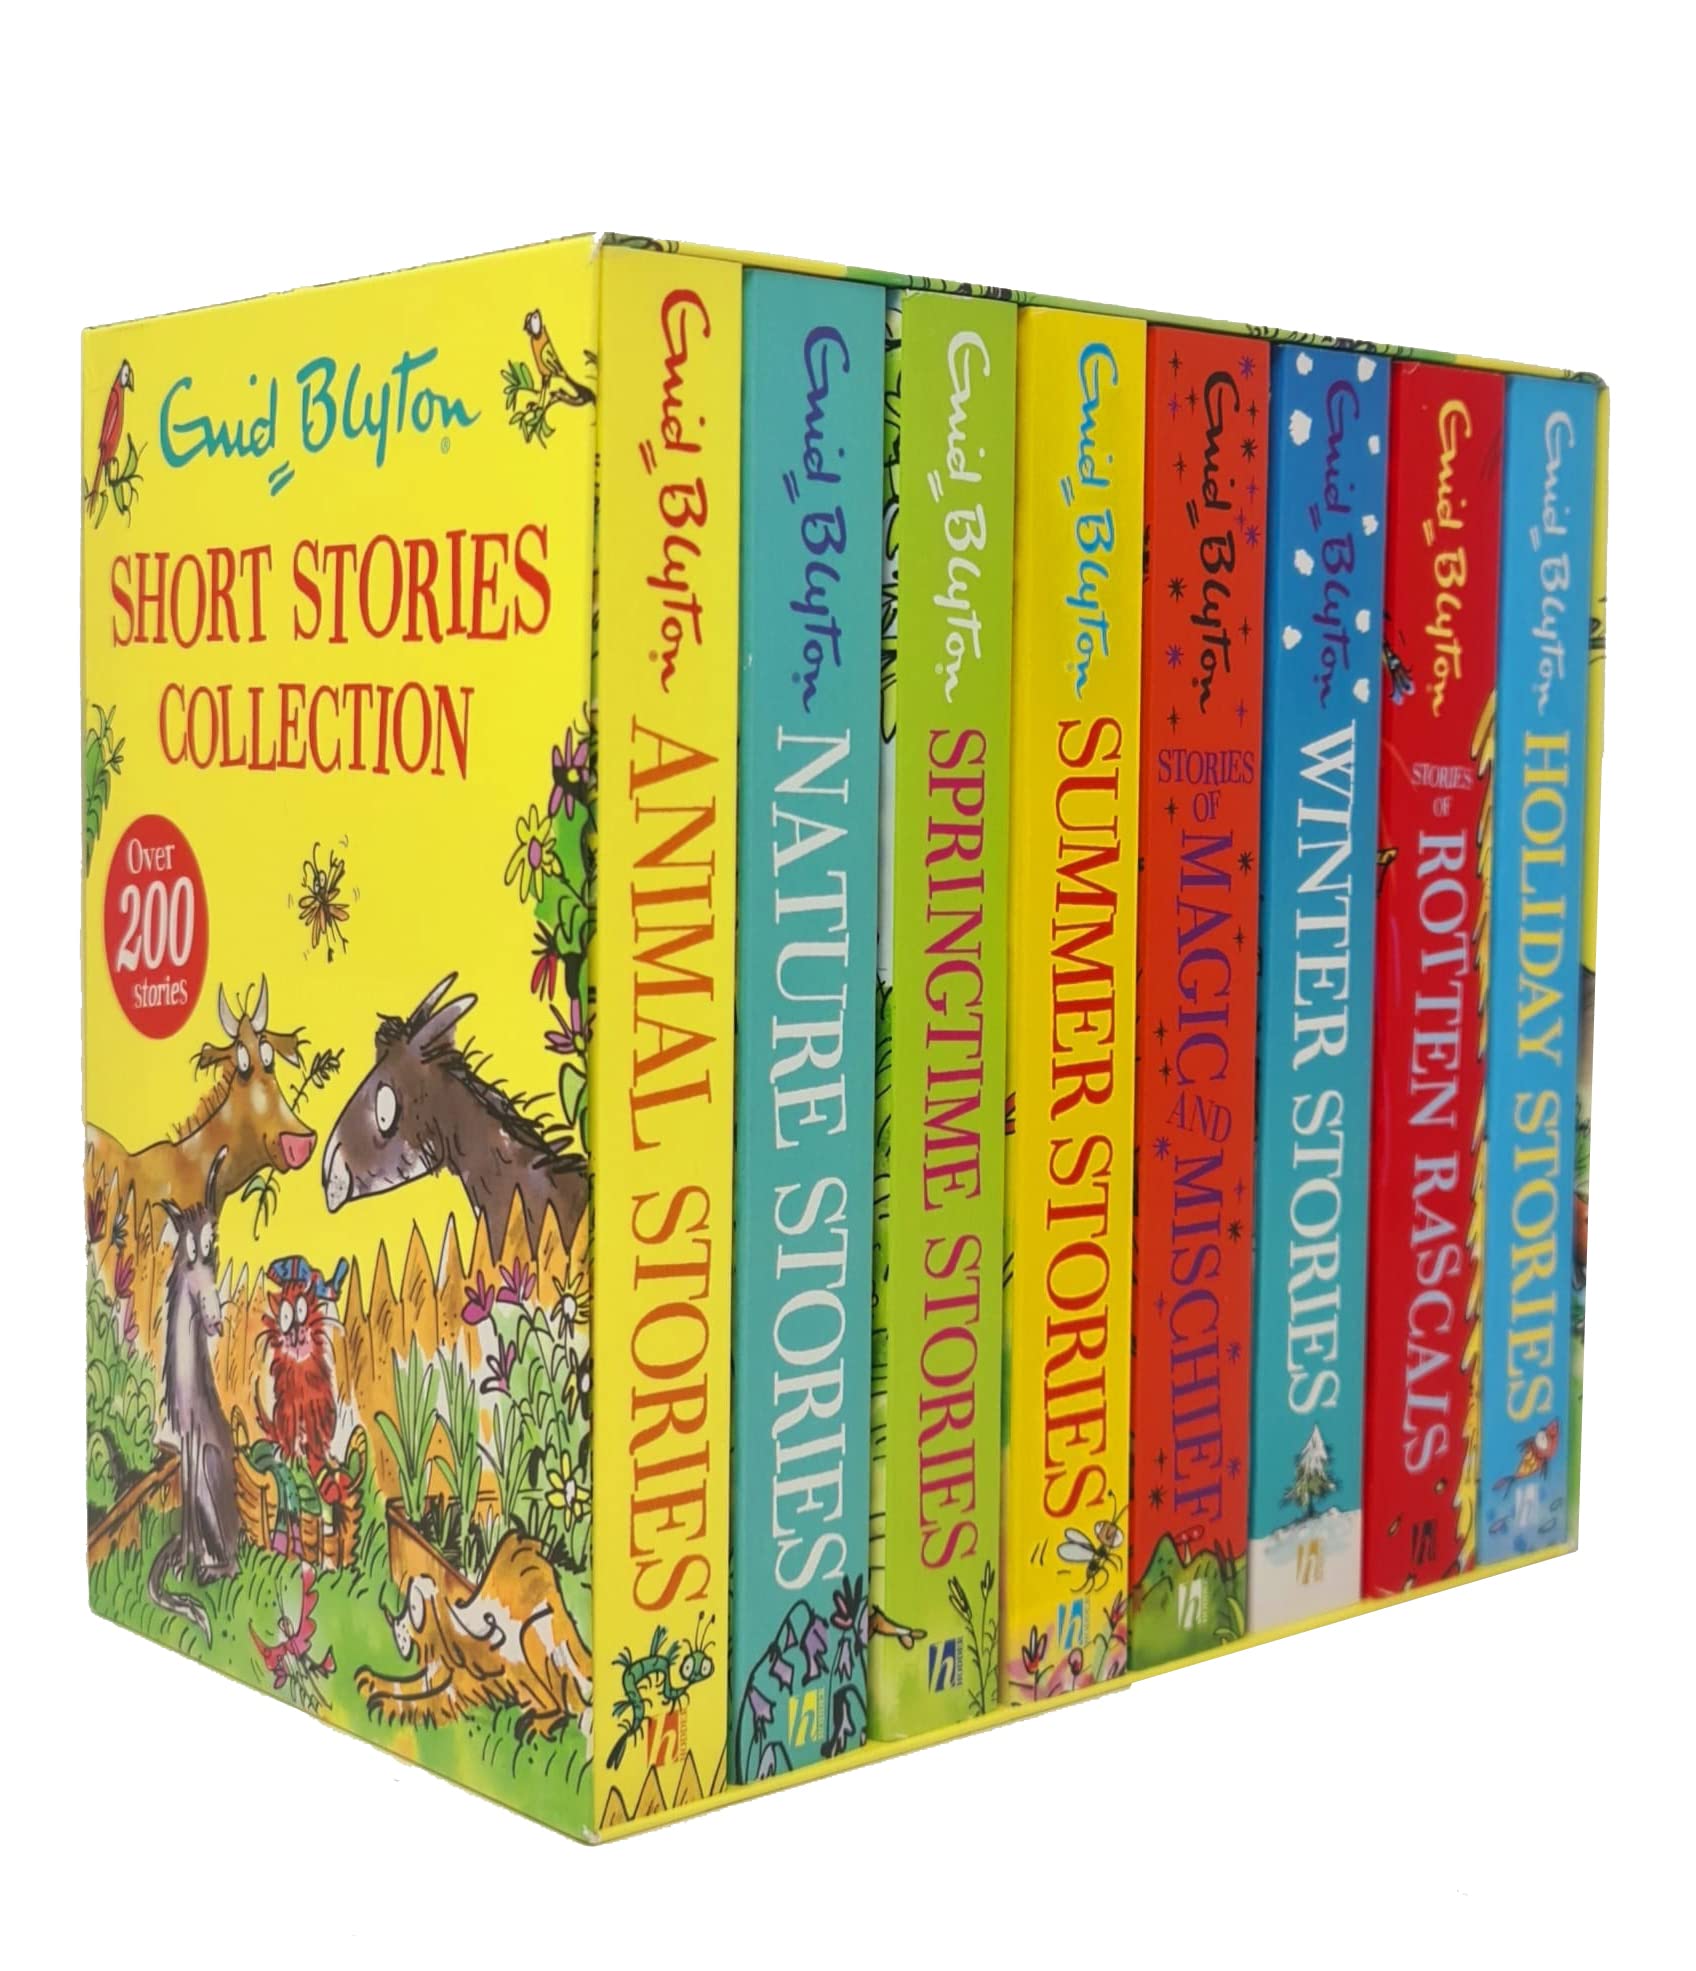 Short Stories Collection 8 Books Box Set by Enid Blyton Animal Stories Paperback - Lets Buy Books